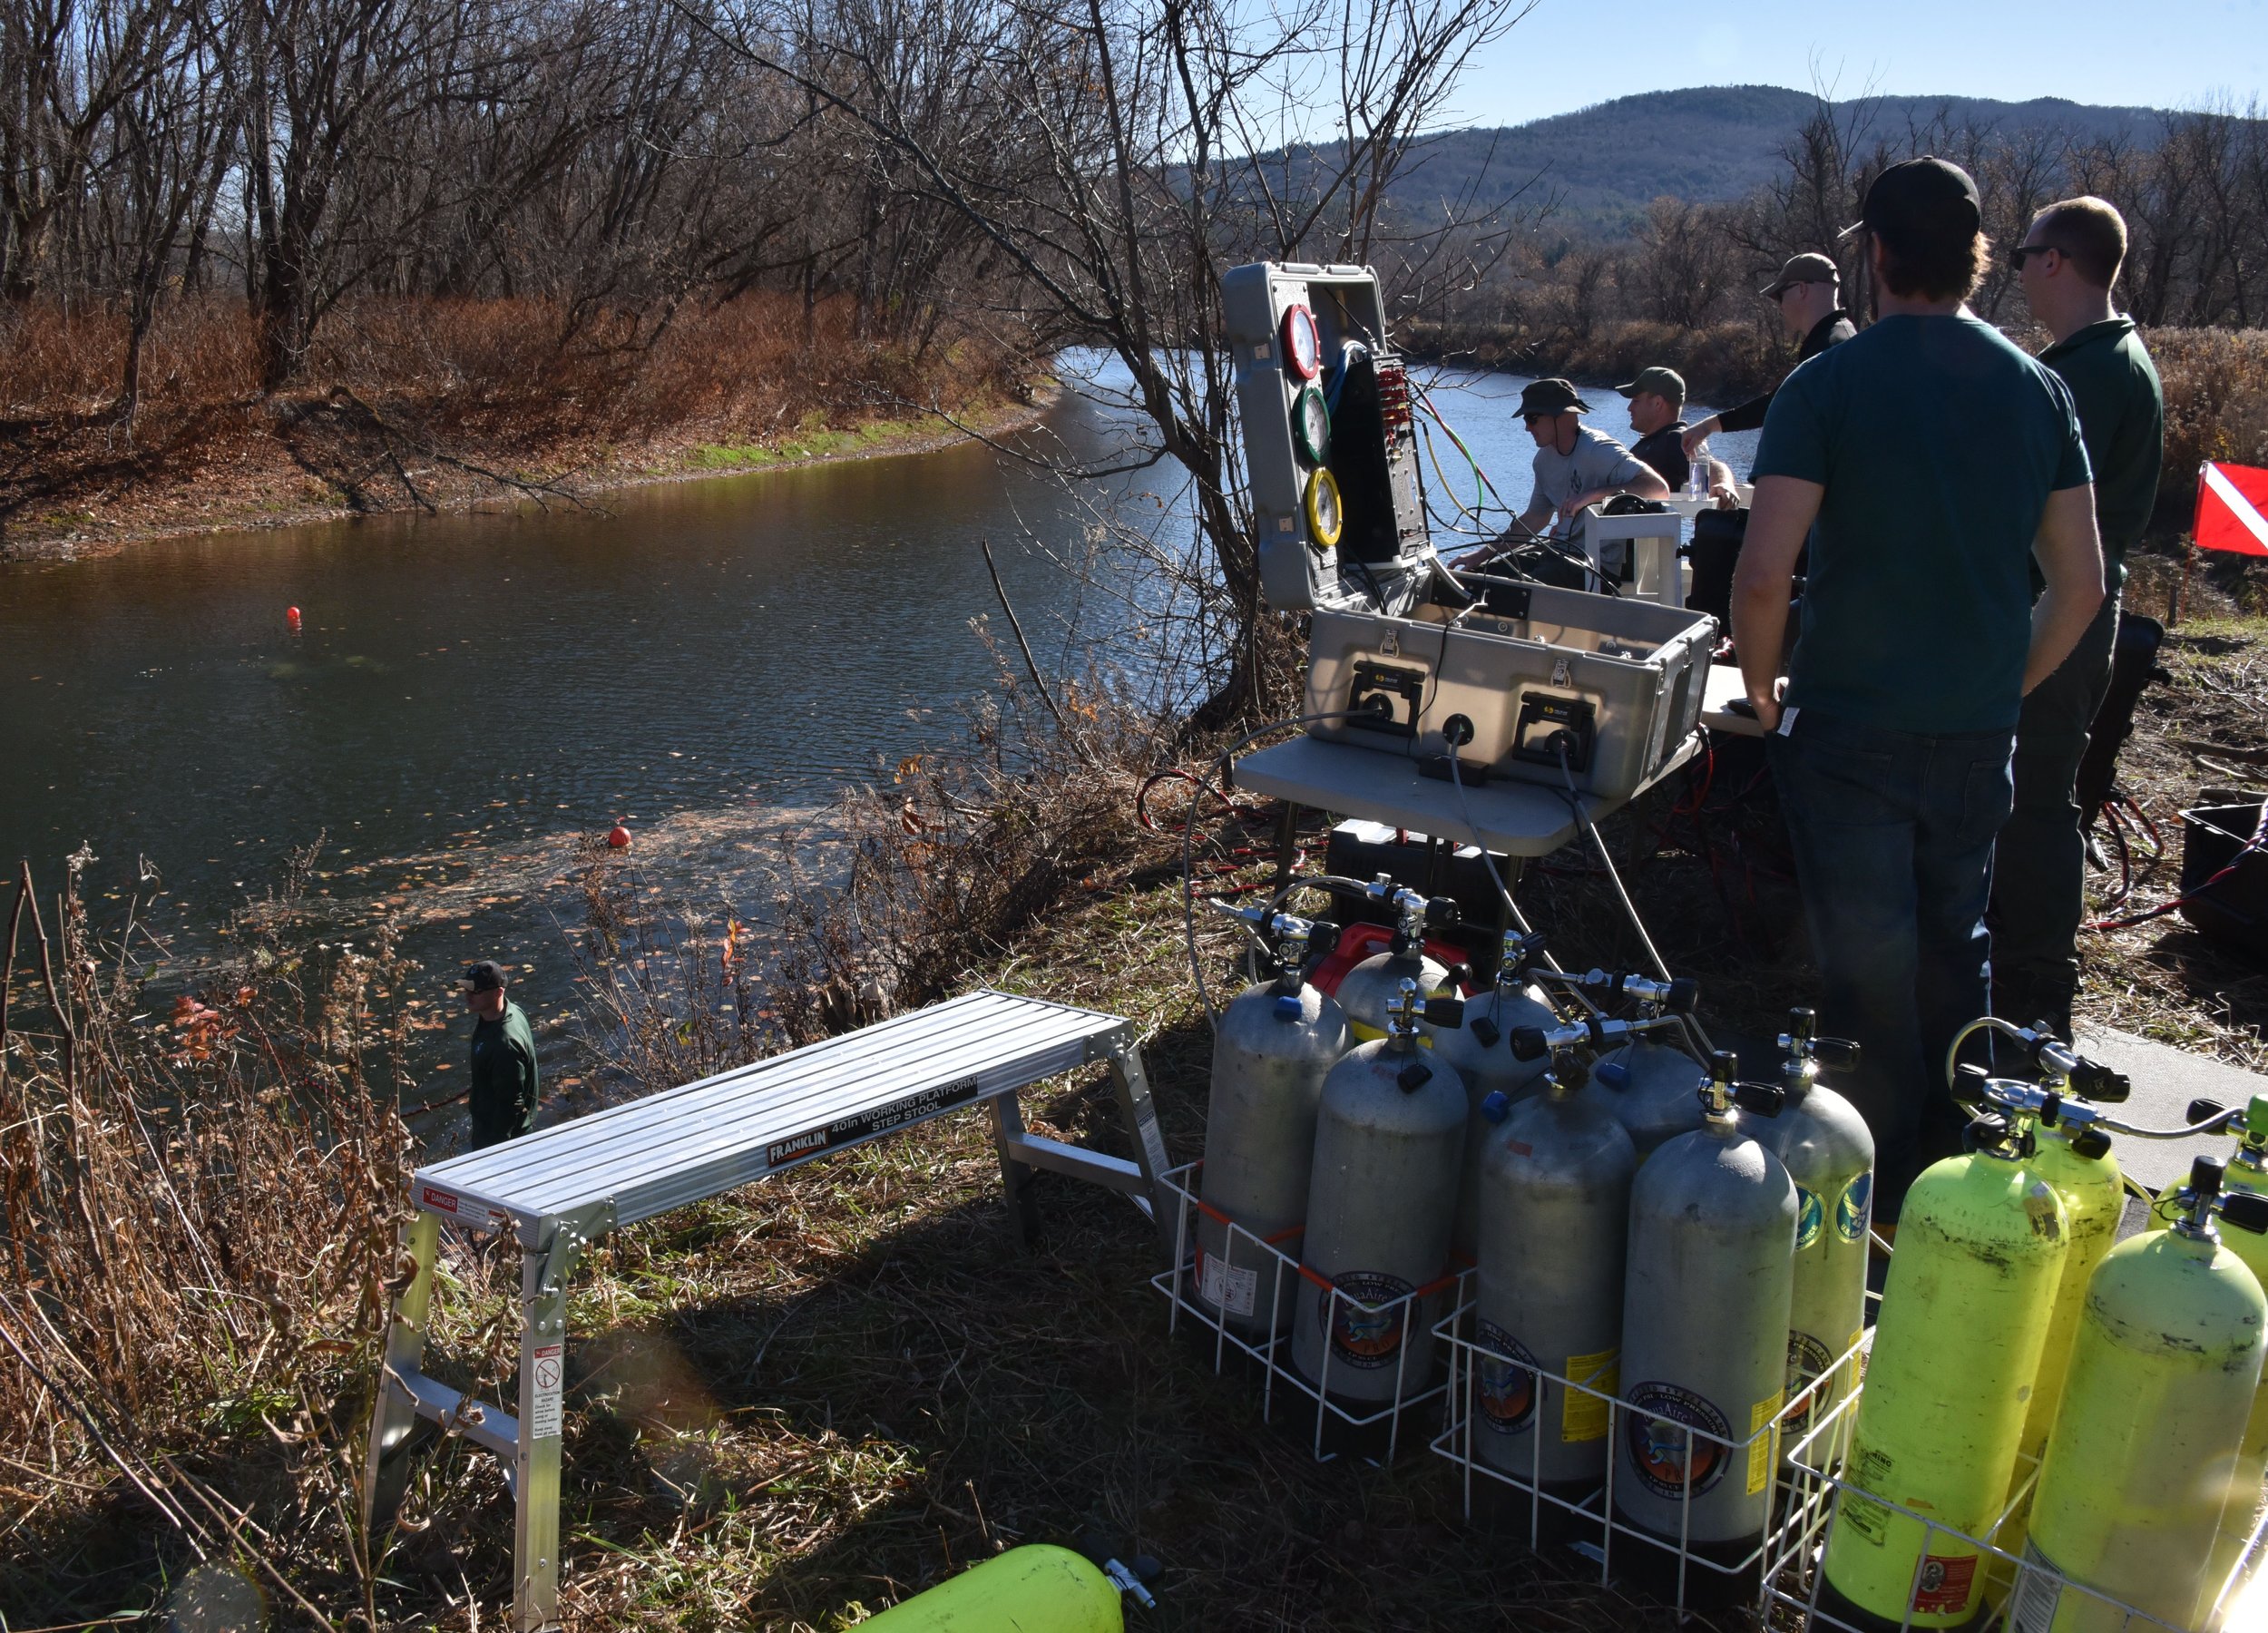  Dive team members are set up on the bank above the spot where Donald Messier’s truck was recovered and where divers will work for the day. Photo by Gordon Miller 